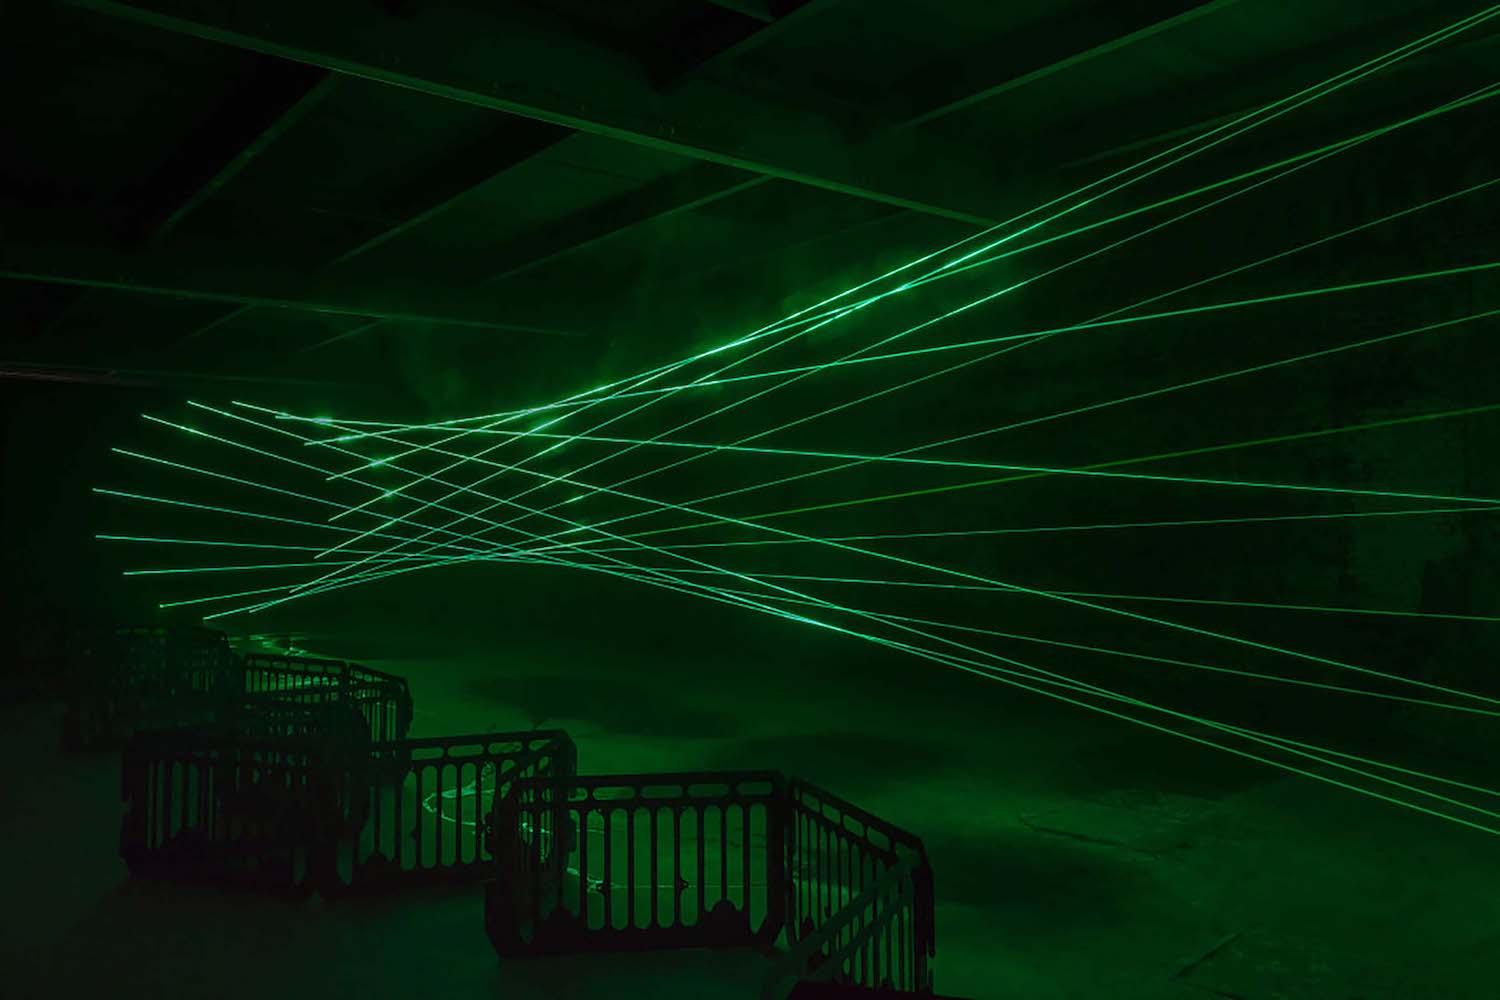 Green lasers shooting across a room